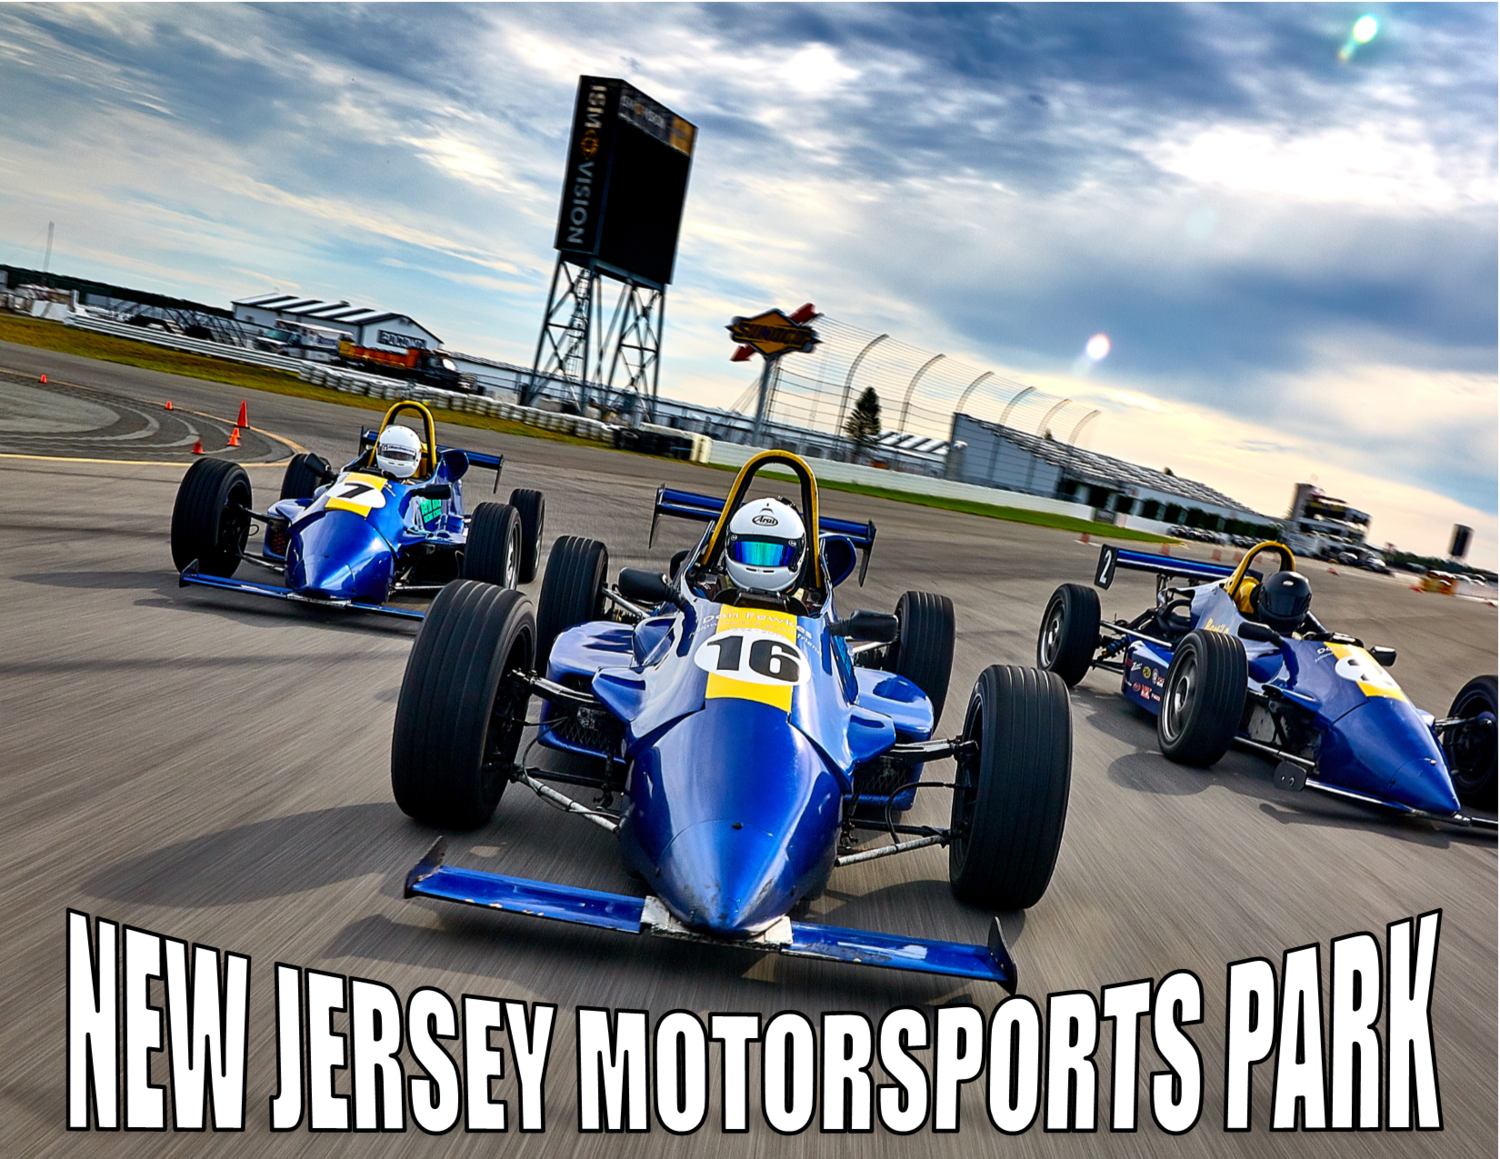 New Jersey Motorsports Park - AM Lapping/Practice Session